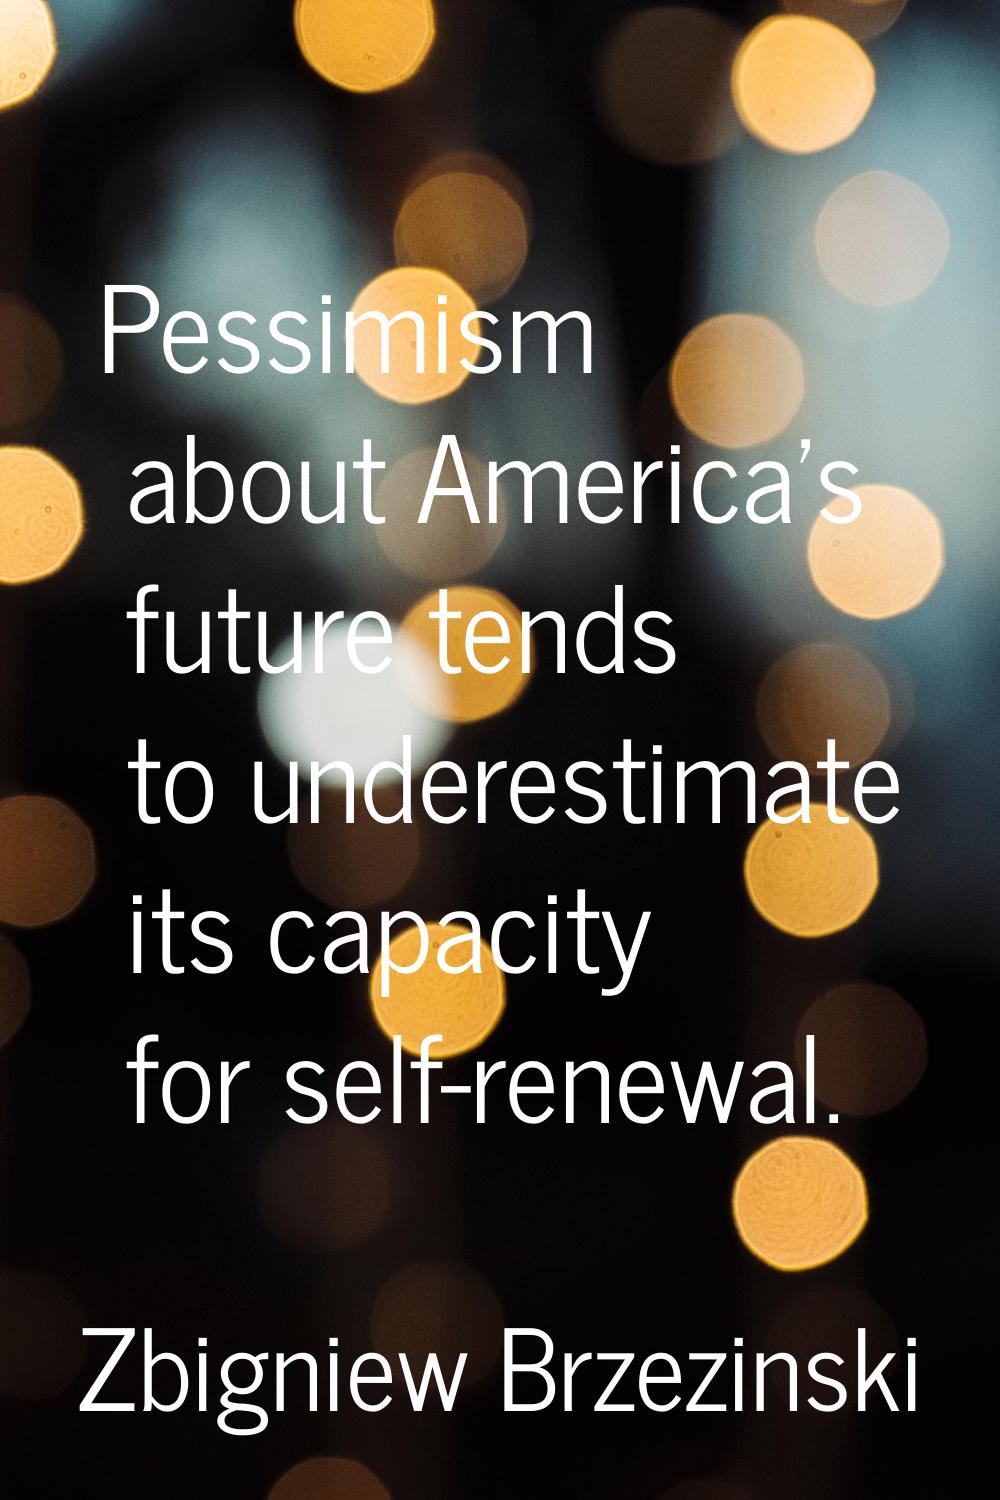 Pessimism about America's future tends to underestimate its capacity for self-renewal.